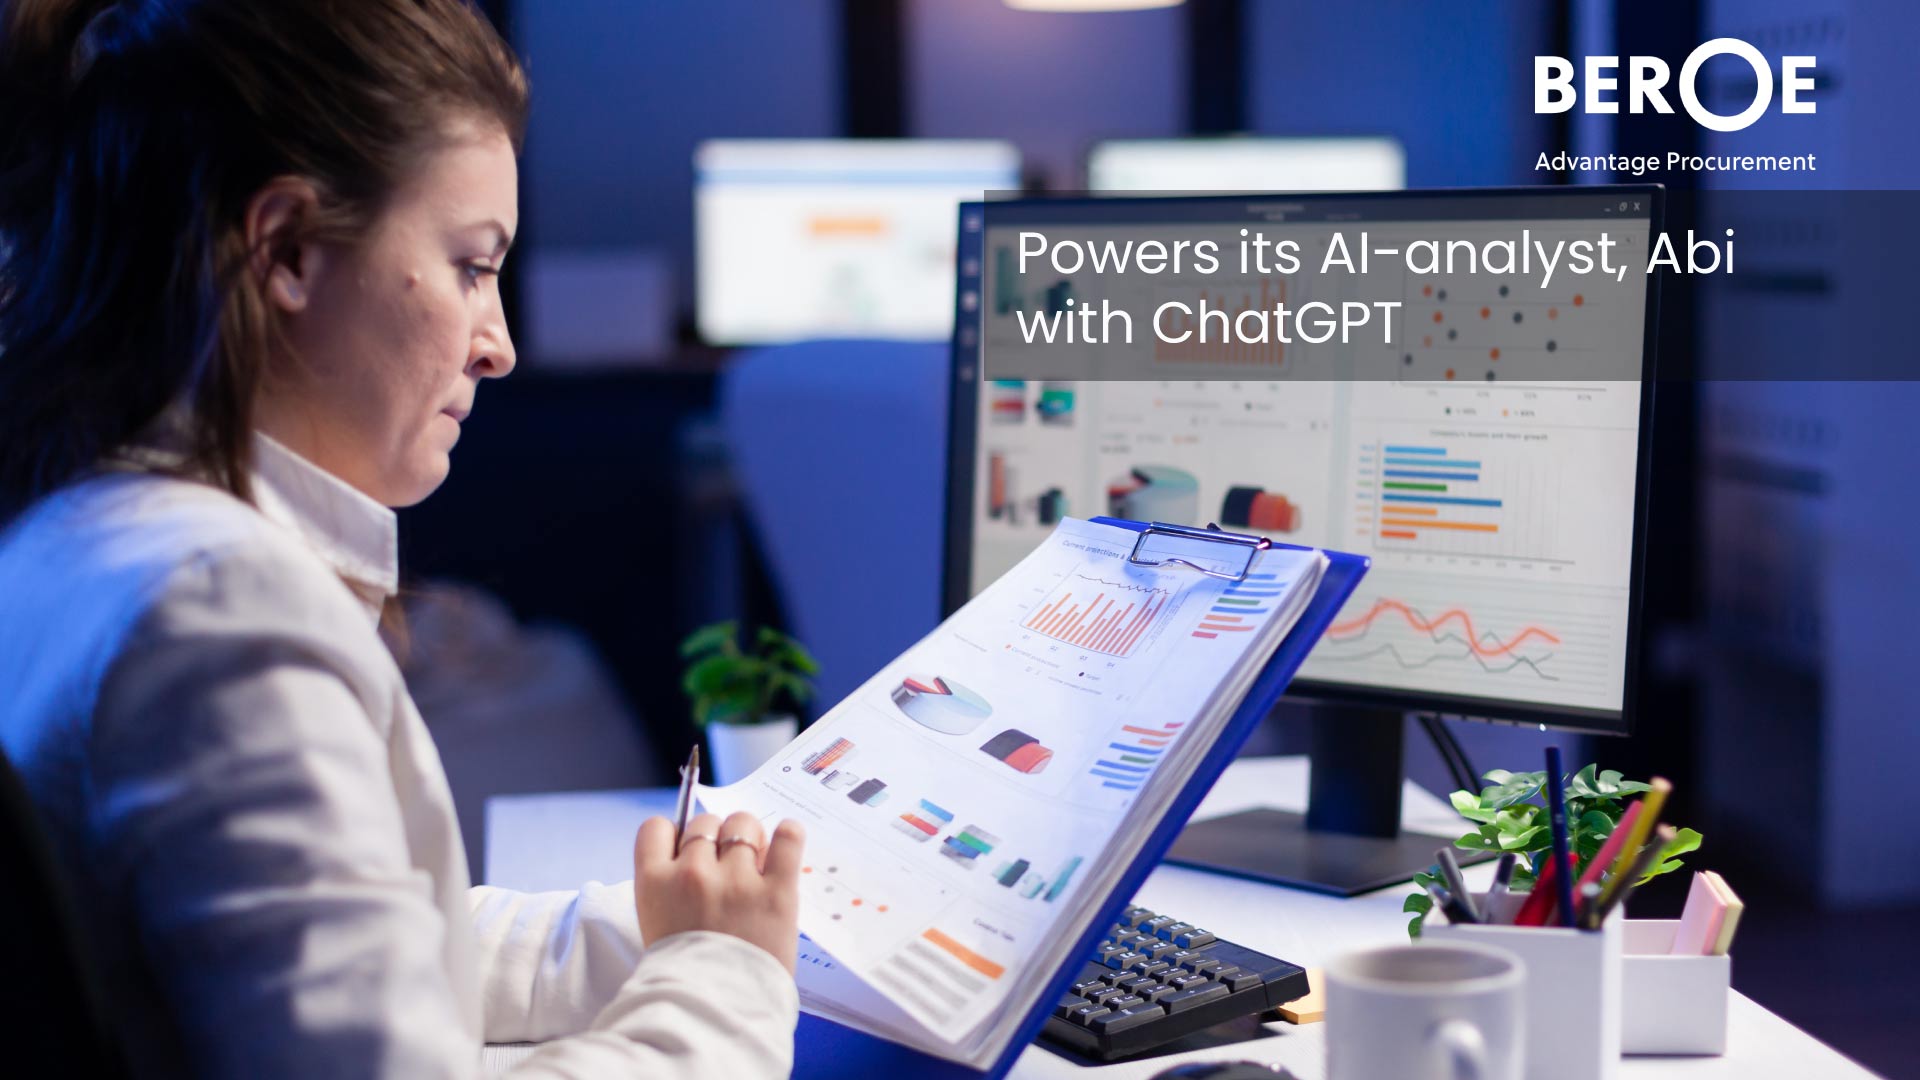 Smart gets smarter - Beroe's AI-analyst Abi is now powered by ChatGPT